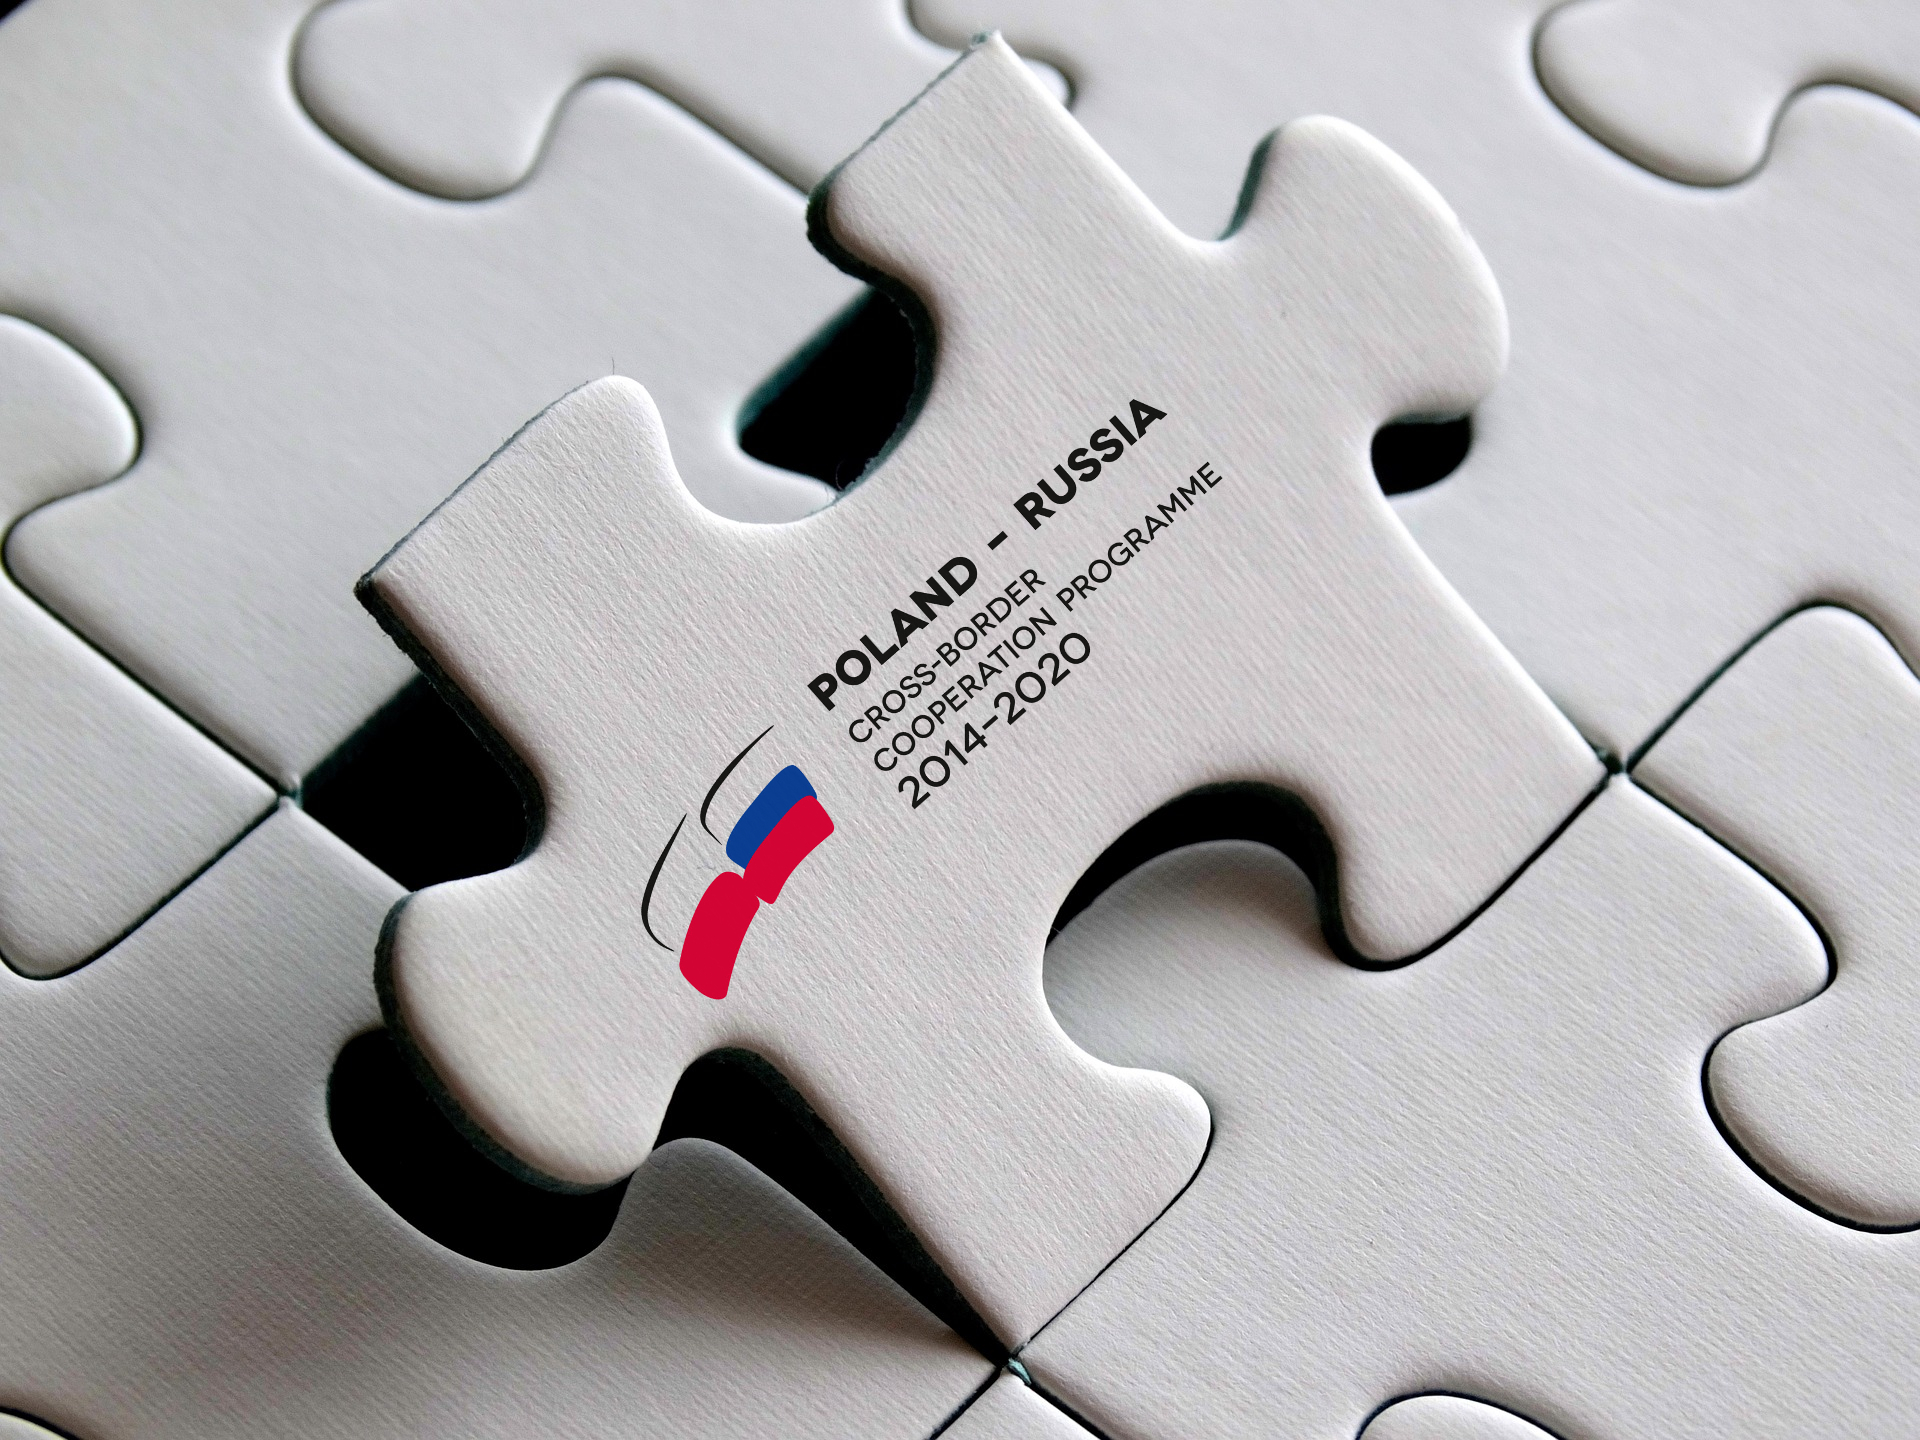 Poland - Russia Cross - Border Cooperation Programme - puzzles